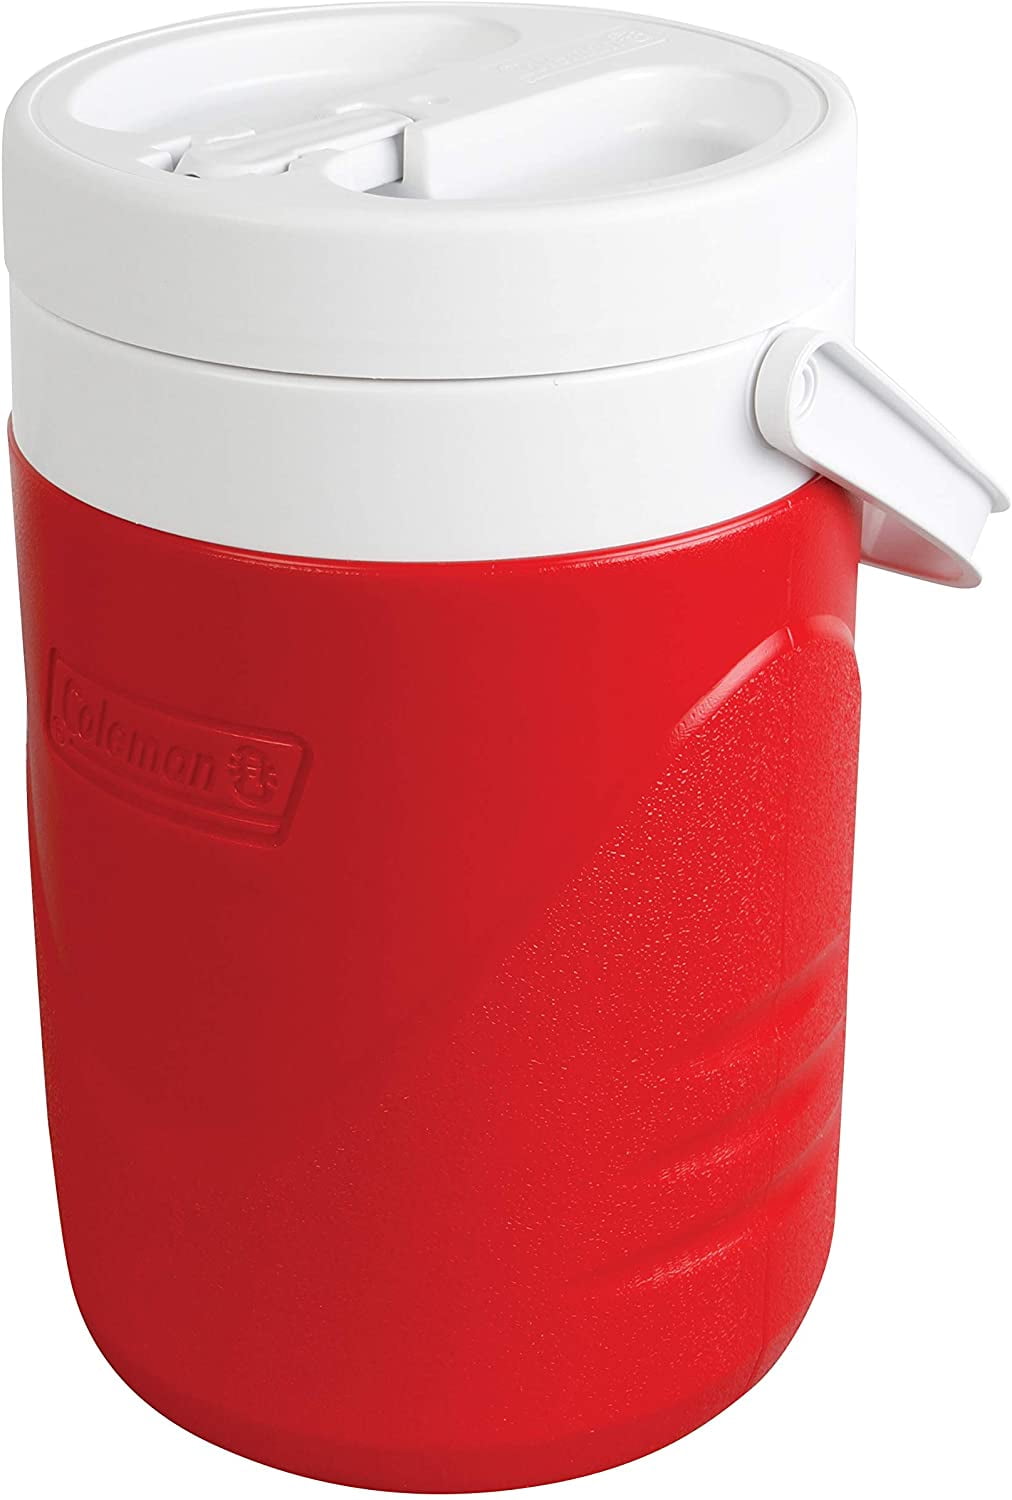 Coleman Half Gallon Thermos Jug, Portable, Insulated, Red 